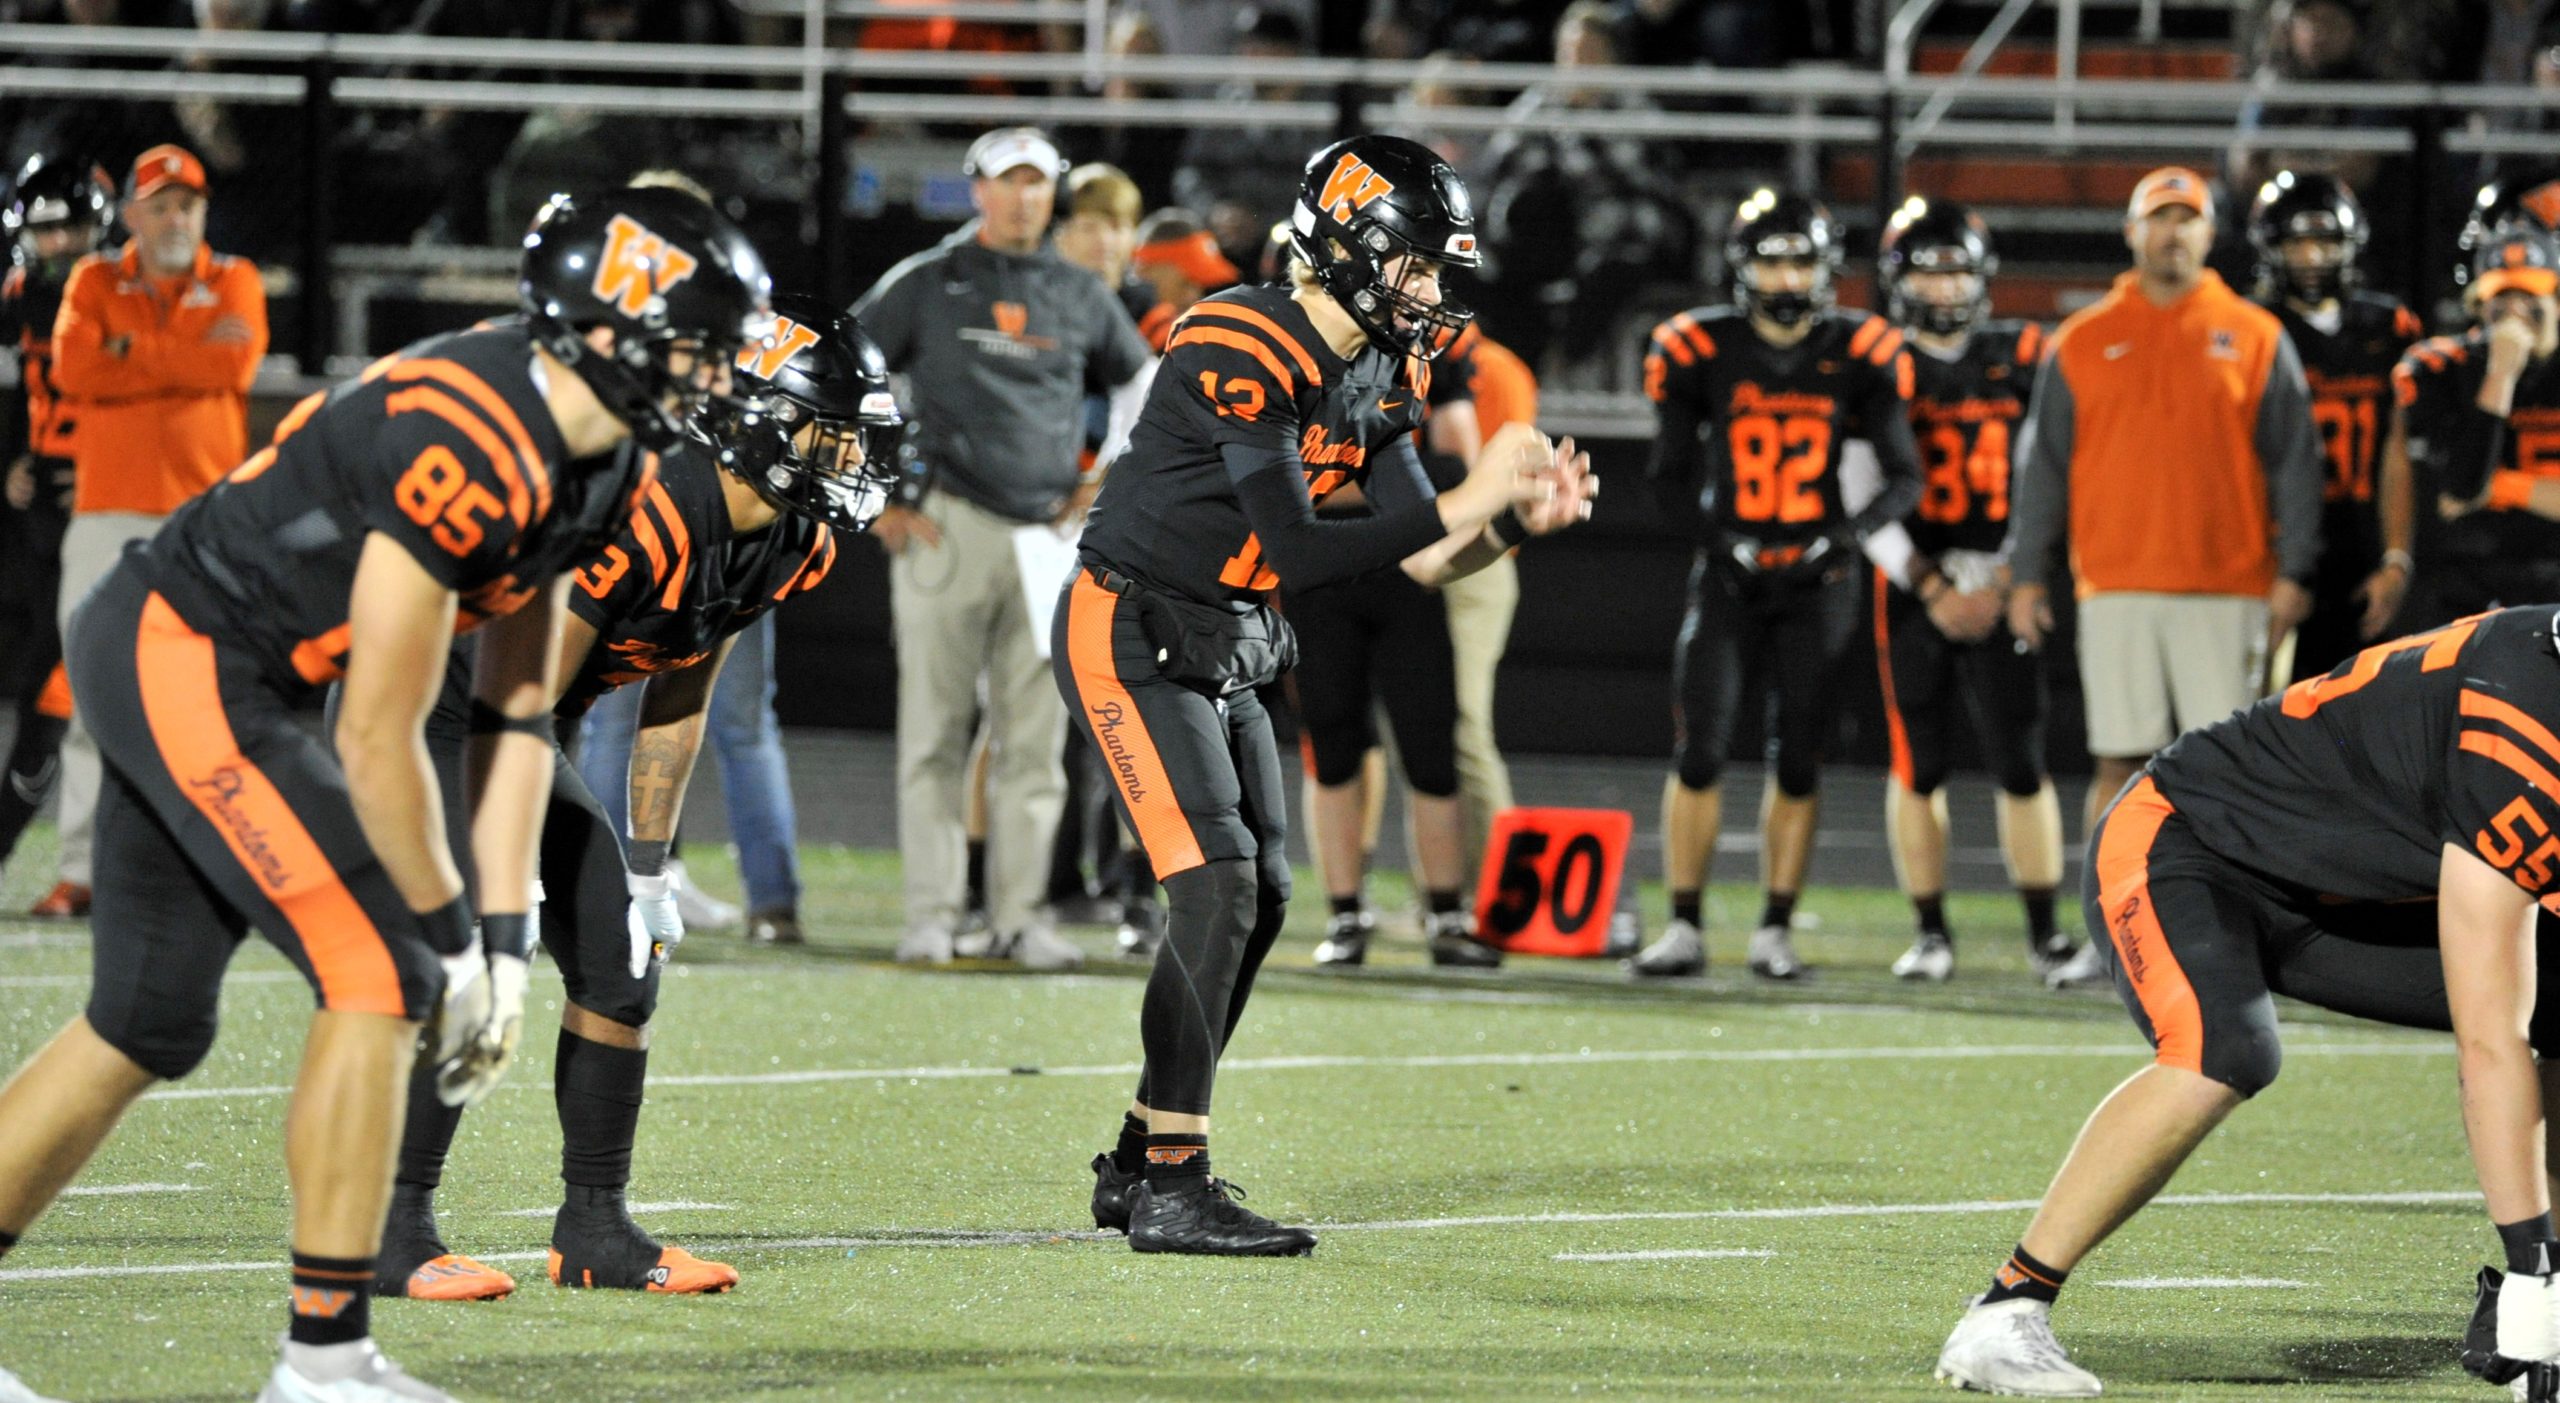 LEVEL 3 PLAYOFFS: West De Pere crushes River Falls to move on